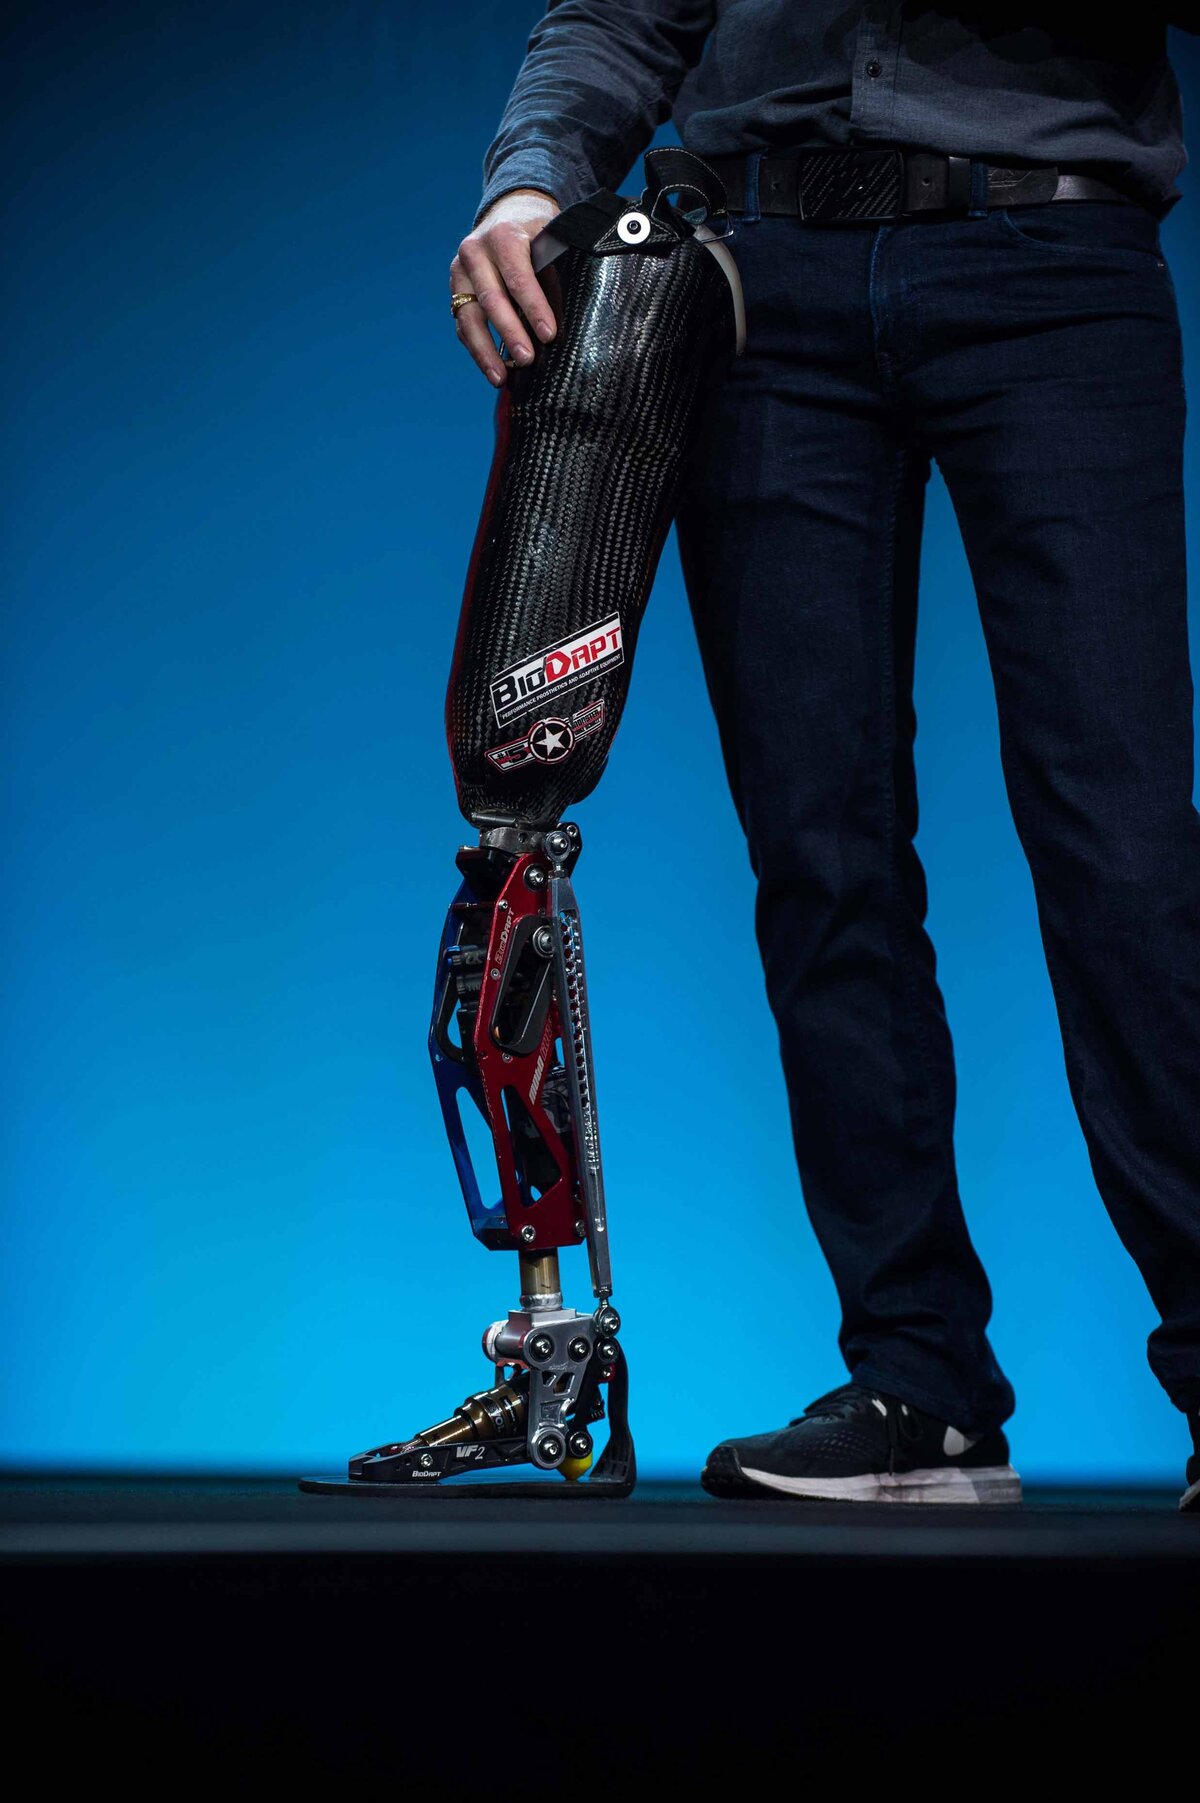 An engineered prosthetic leg with flexible joints and built in shock absorption leans on a mans waist during a presentation